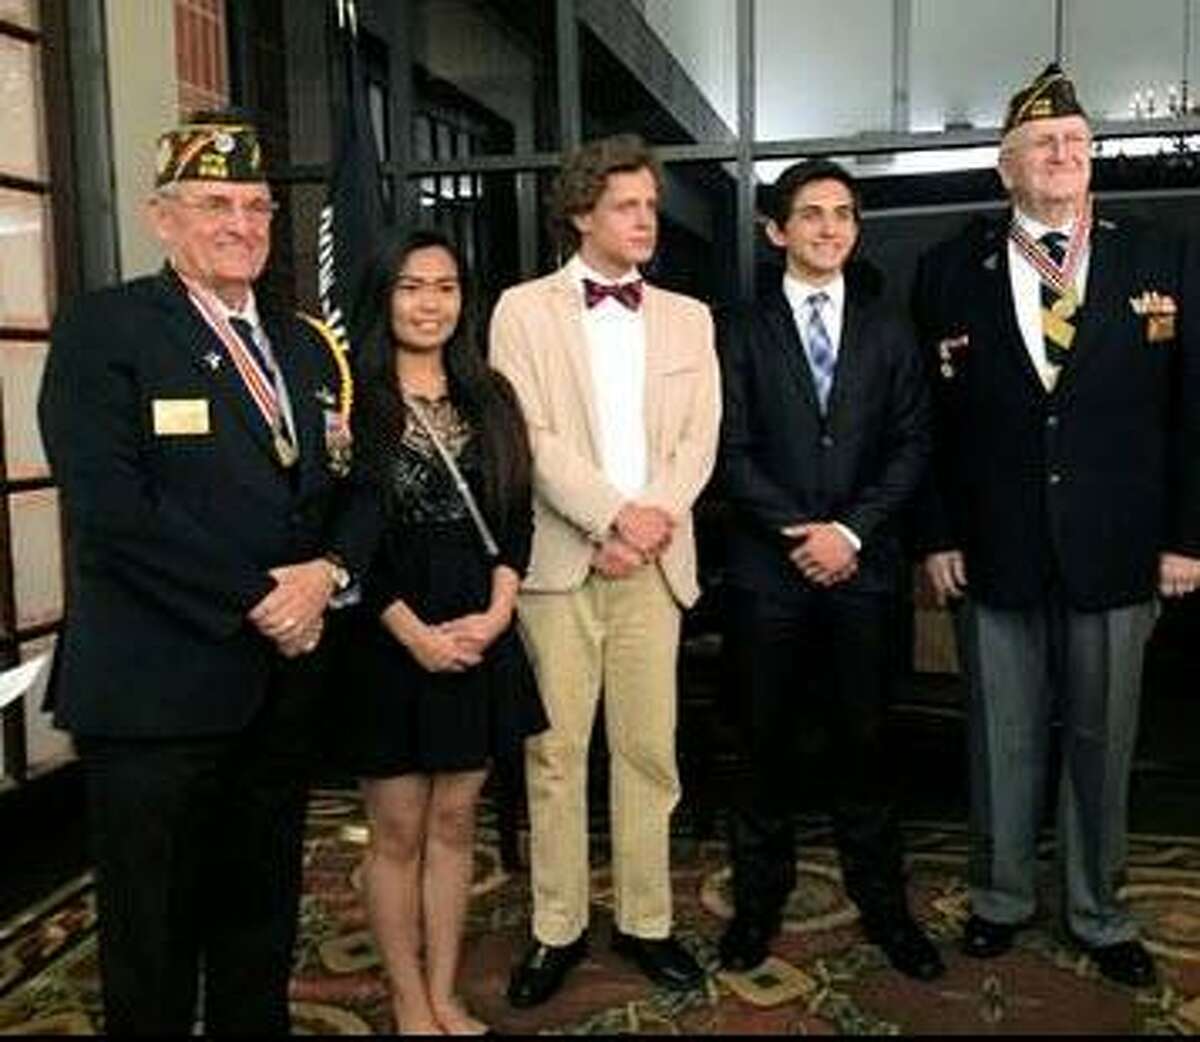 The Katy Veterans of Foreign Wars 9182 recognized The Voice of Democracy winners in the spring. They are: First Place James Belin Jr. of Tompkins High School, $500 award; Second Place Madison Muldune of Seven Lakes High School, $300 award; Third Place Rowan Lobdell of Tompkins High School, $200 award. This year's theme for the audio-essay program was “Why My Vote Matters.” From left are: Tony Hart, senior vice commander; Muldune; Lobdell; Belin and Don Byrne, post commander.